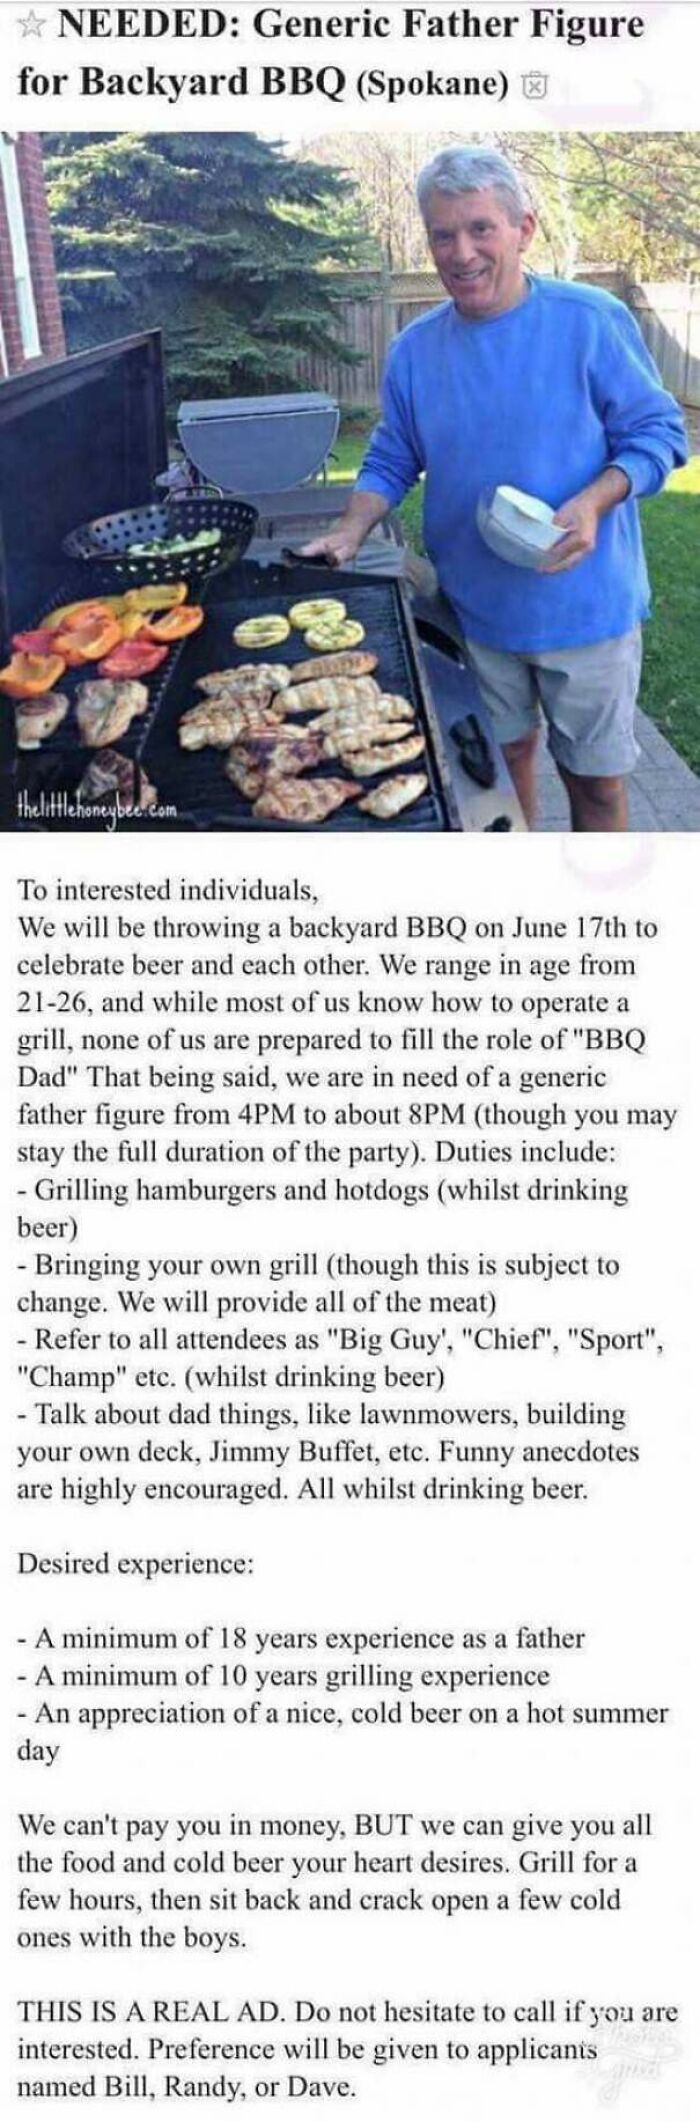 wtf craigslist and facebook posts - craigslist dad ad - Needed Generic Father Figure for Backyard Bbq Spokane the littlehoneybee.com To interested individuals, We will be throwing a backyard Bbq on June 17th to celebrate beer and each other. We range in a